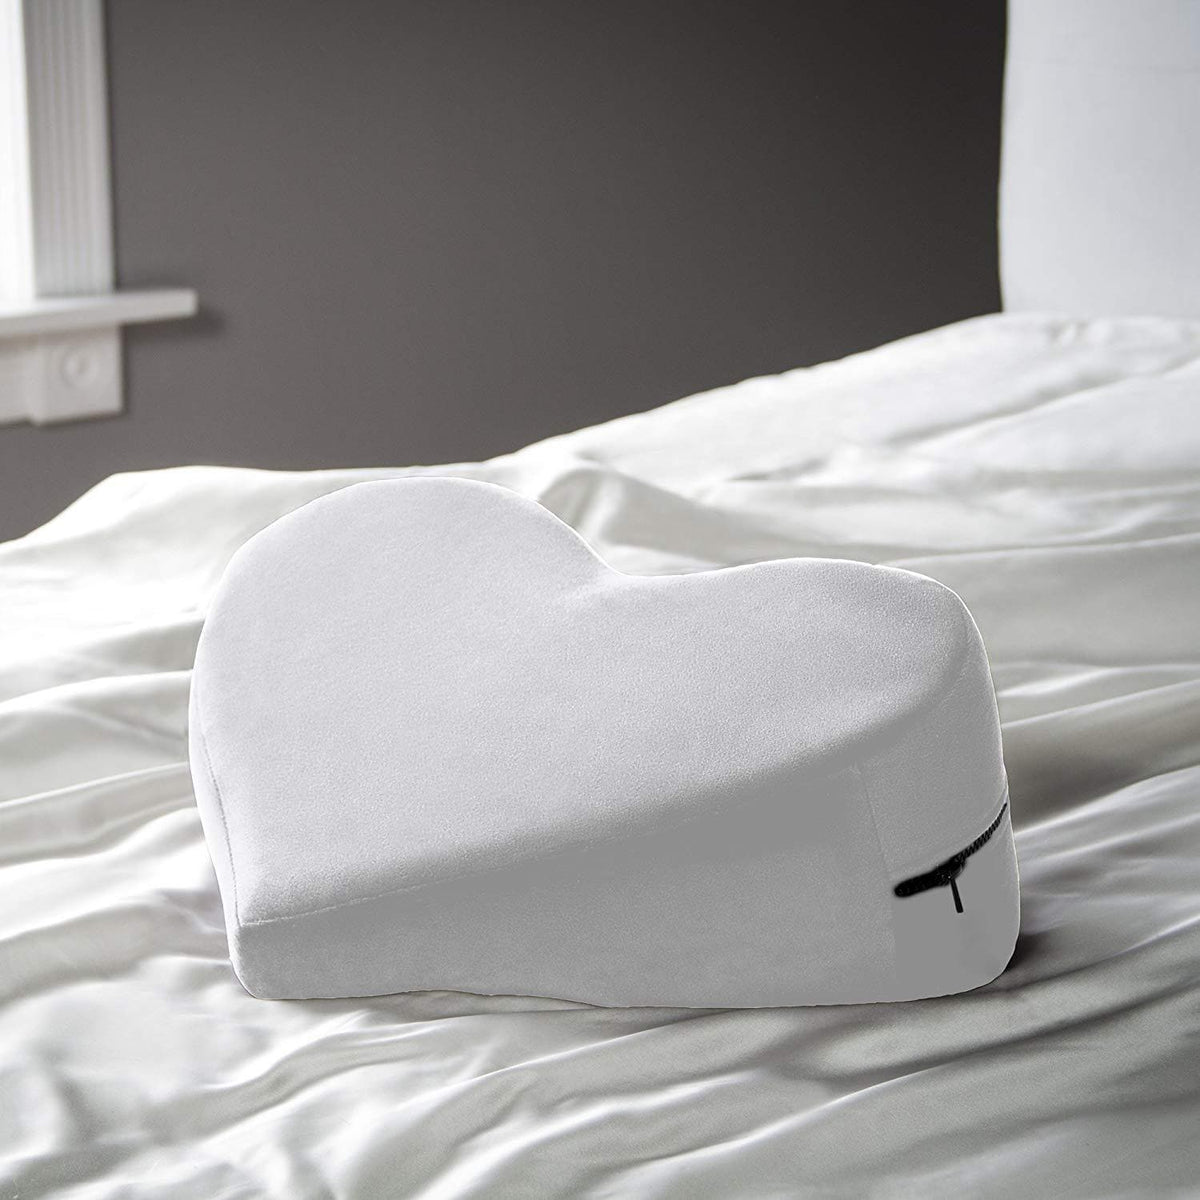 Liberator Heart Wedge Pillow Inclined Couples Sex Position Aid For G Spot Positioning Romantic 8217